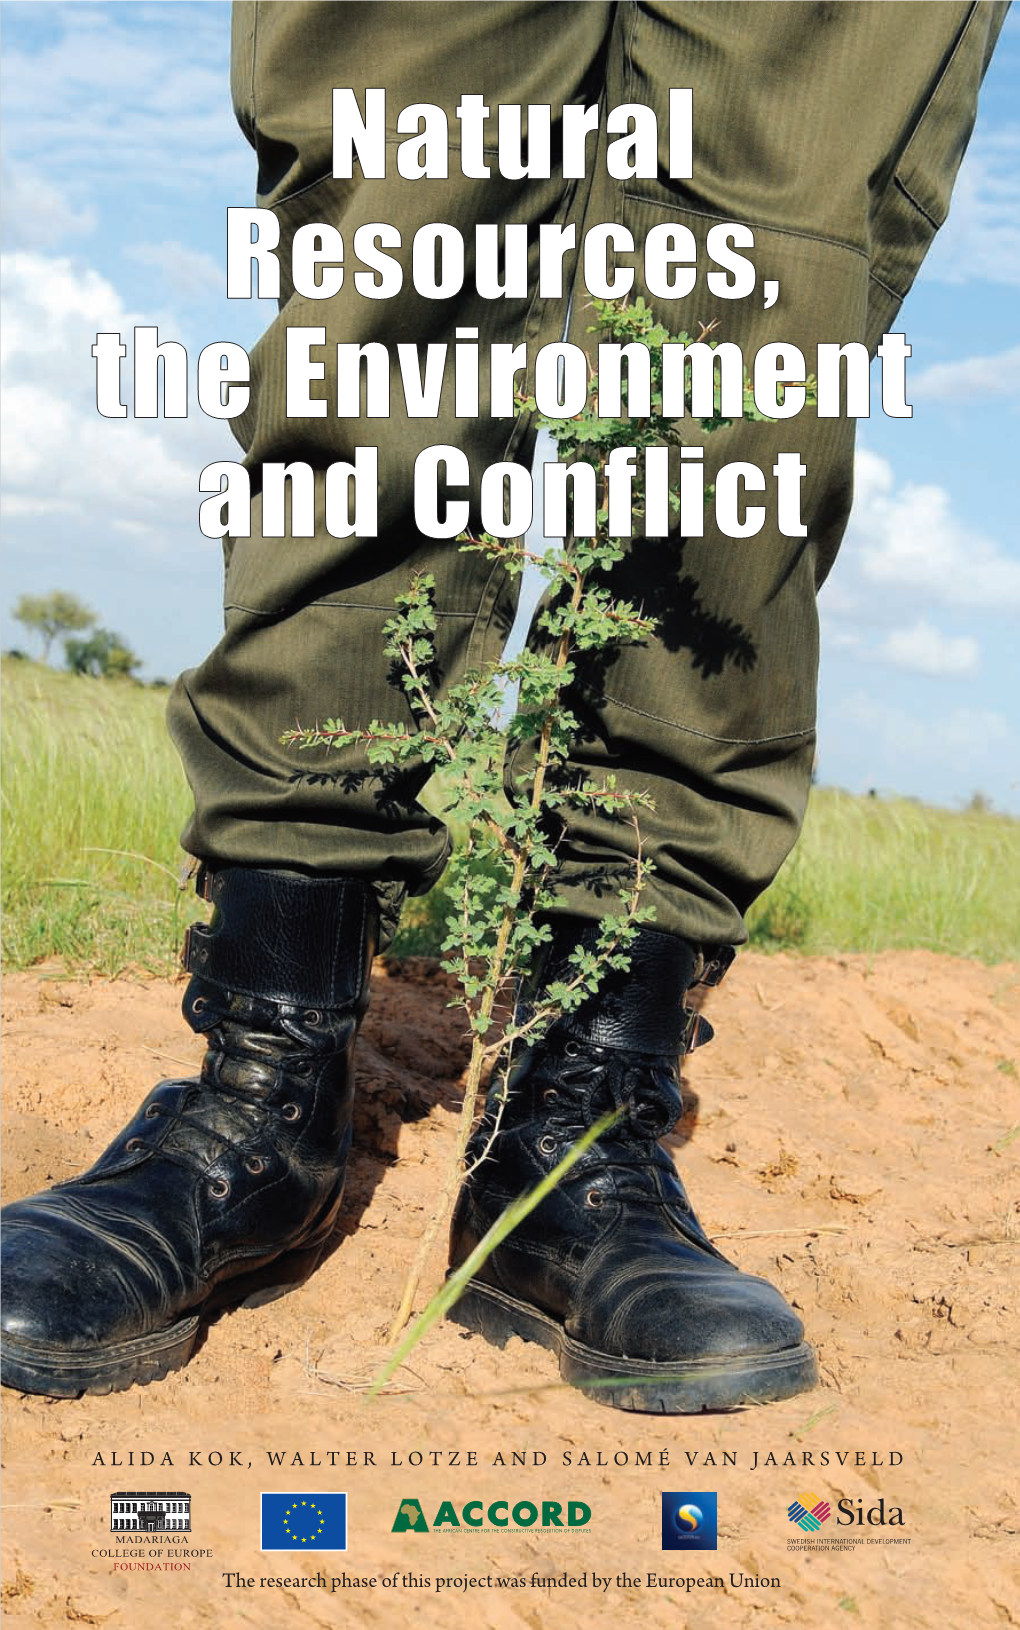 Natural Resources, the Environment and Conflict